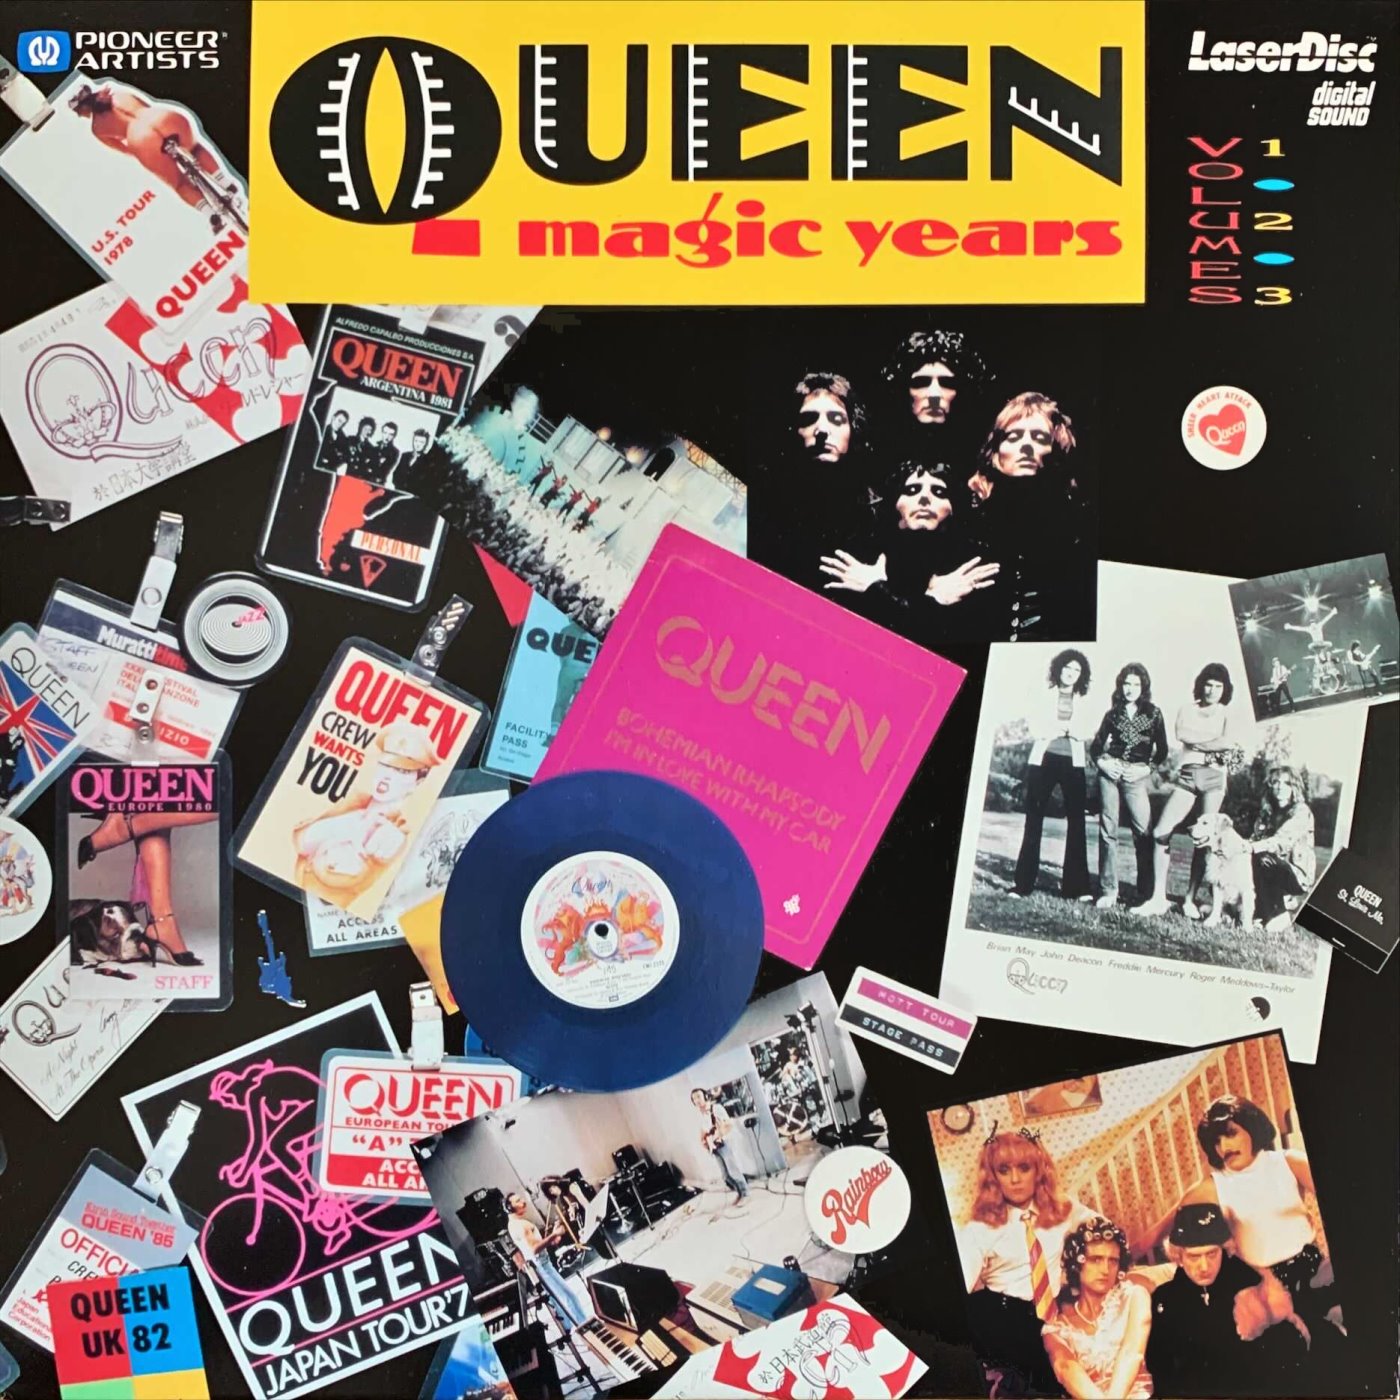 Cover - Queen - Magic Years - A Visual Anthology.jpg